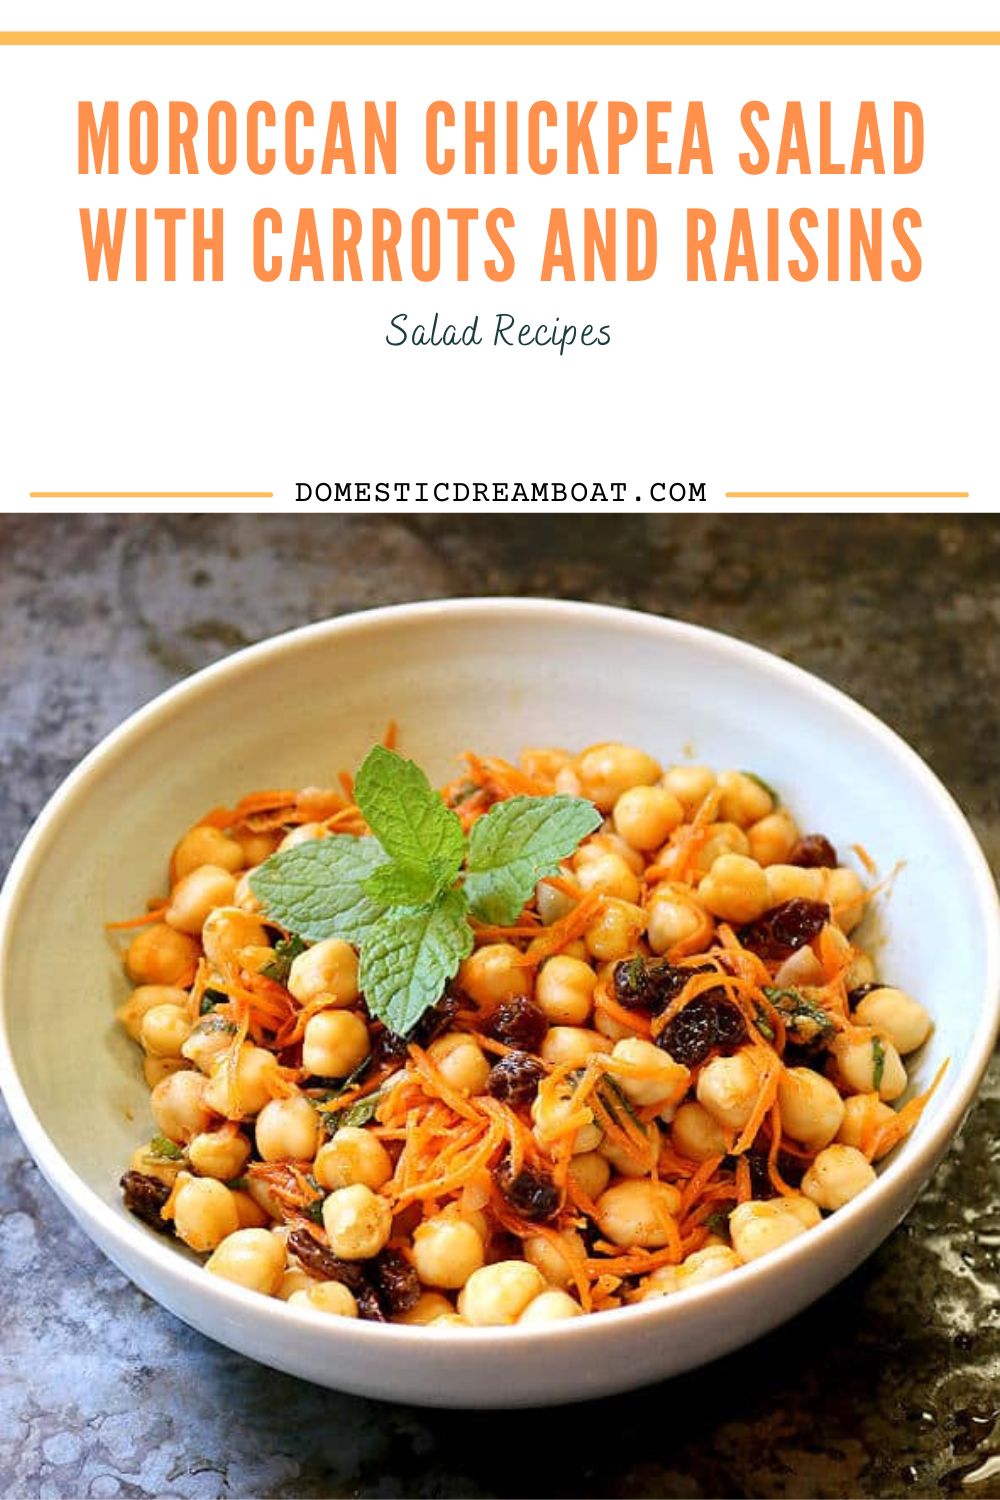 Moroccan Chickpea Salad with Carrots and Raisins